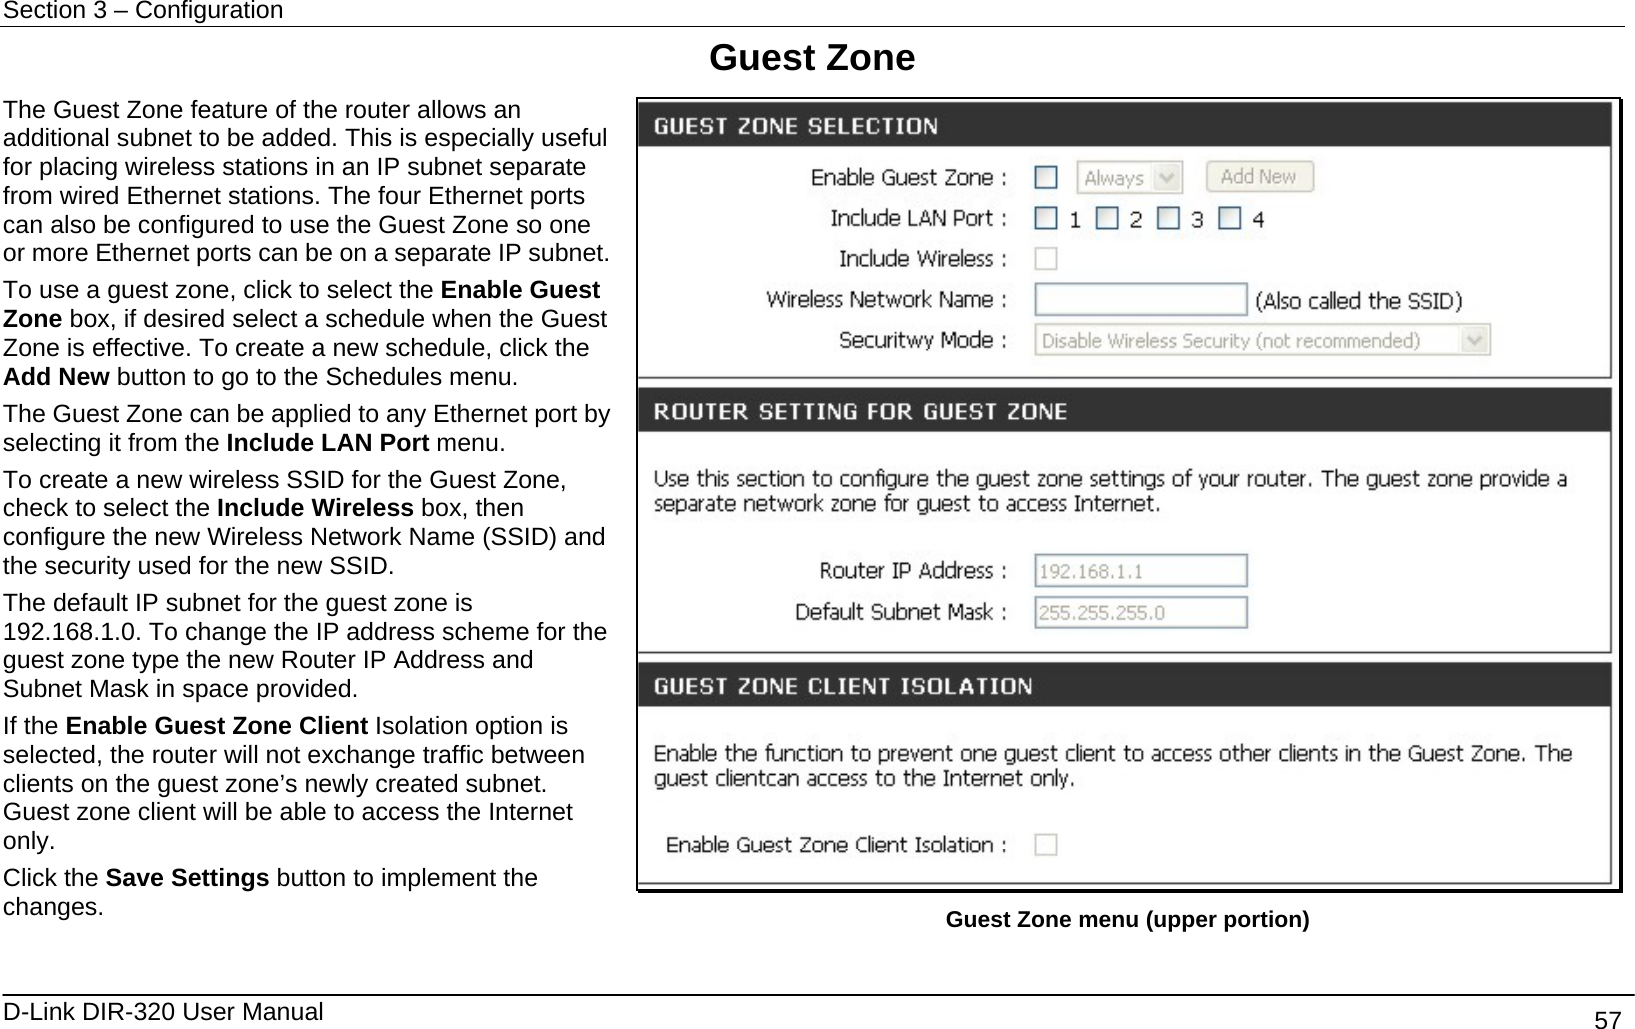 Section 3 – Configuration   D-Link DIR-320 User Manual                                       57 Guest Zone The Guest Zone feature of the router allows an additional subnet to be added. This is especially useful for placing wireless stations in an IP subnet separate from wired Ethernet stations. The four Ethernet ports can also be configured to use the Guest Zone so one or more Ethernet ports can be on a separate IP subnet.To use a guest zone, click to select the Enable Guest Zone box, if desired select a schedule when the Guest Zone is effective. To create a new schedule, click the Add New button to go to the Schedules menu. The Guest Zone can be applied to any Ethernet port by selecting it from the Include LAN Port menu. To create a new wireless SSID for the Guest Zone, check to select the Include Wireless box, then configure the new Wireless Network Name (SSID) and the security used for the new SSID.   The default IP subnet for the guest zone is 192.168.1.0. To change the IP address scheme for the guest zone type the new Router IP Address and Subnet Mask in space provided.   If the Enable Guest Zone Client Isolation option is selected, the router will not exchange traffic between clients on the guest zone’s newly created subnet. Guest zone client will be able to access the Internet only. Click the Save Settings button to implement the changes.    Guest Zone menu (upper portion) 